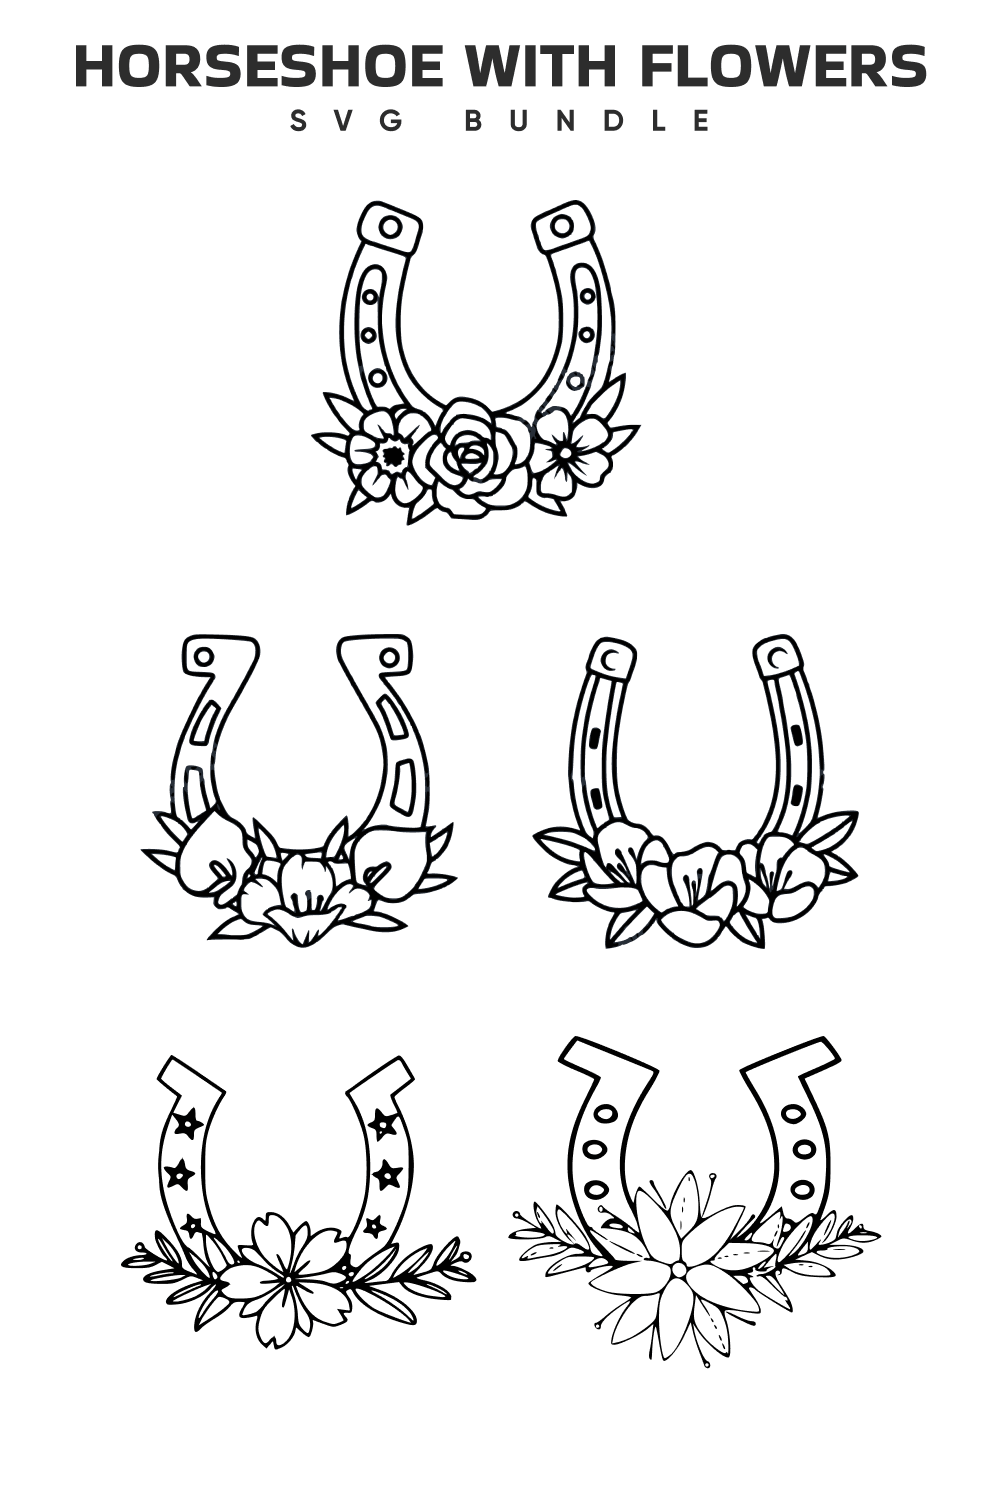 Set of horseshoes with flowers on them.